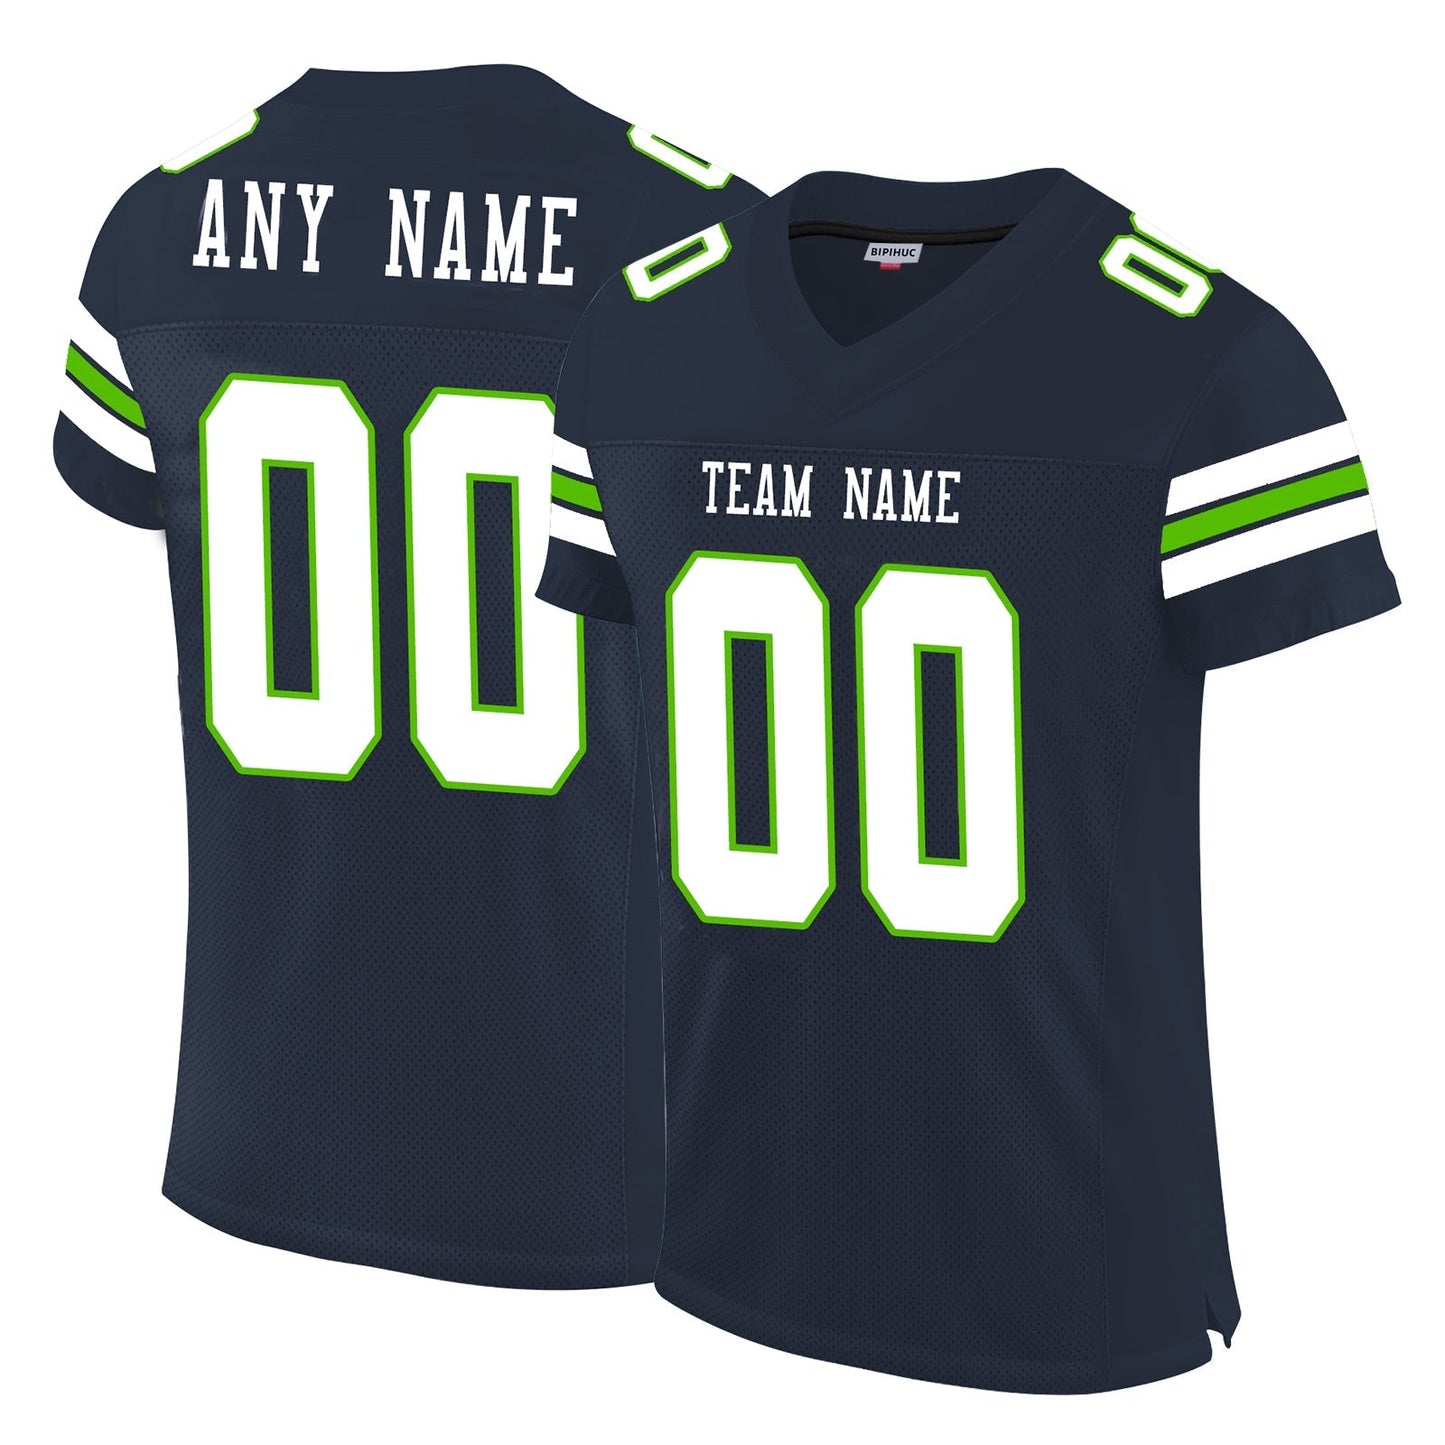 Custom S.Seahawks Football Jerseys Design Navy Stitched Name And Number Size S to 6XL Christmas Birthday Gift